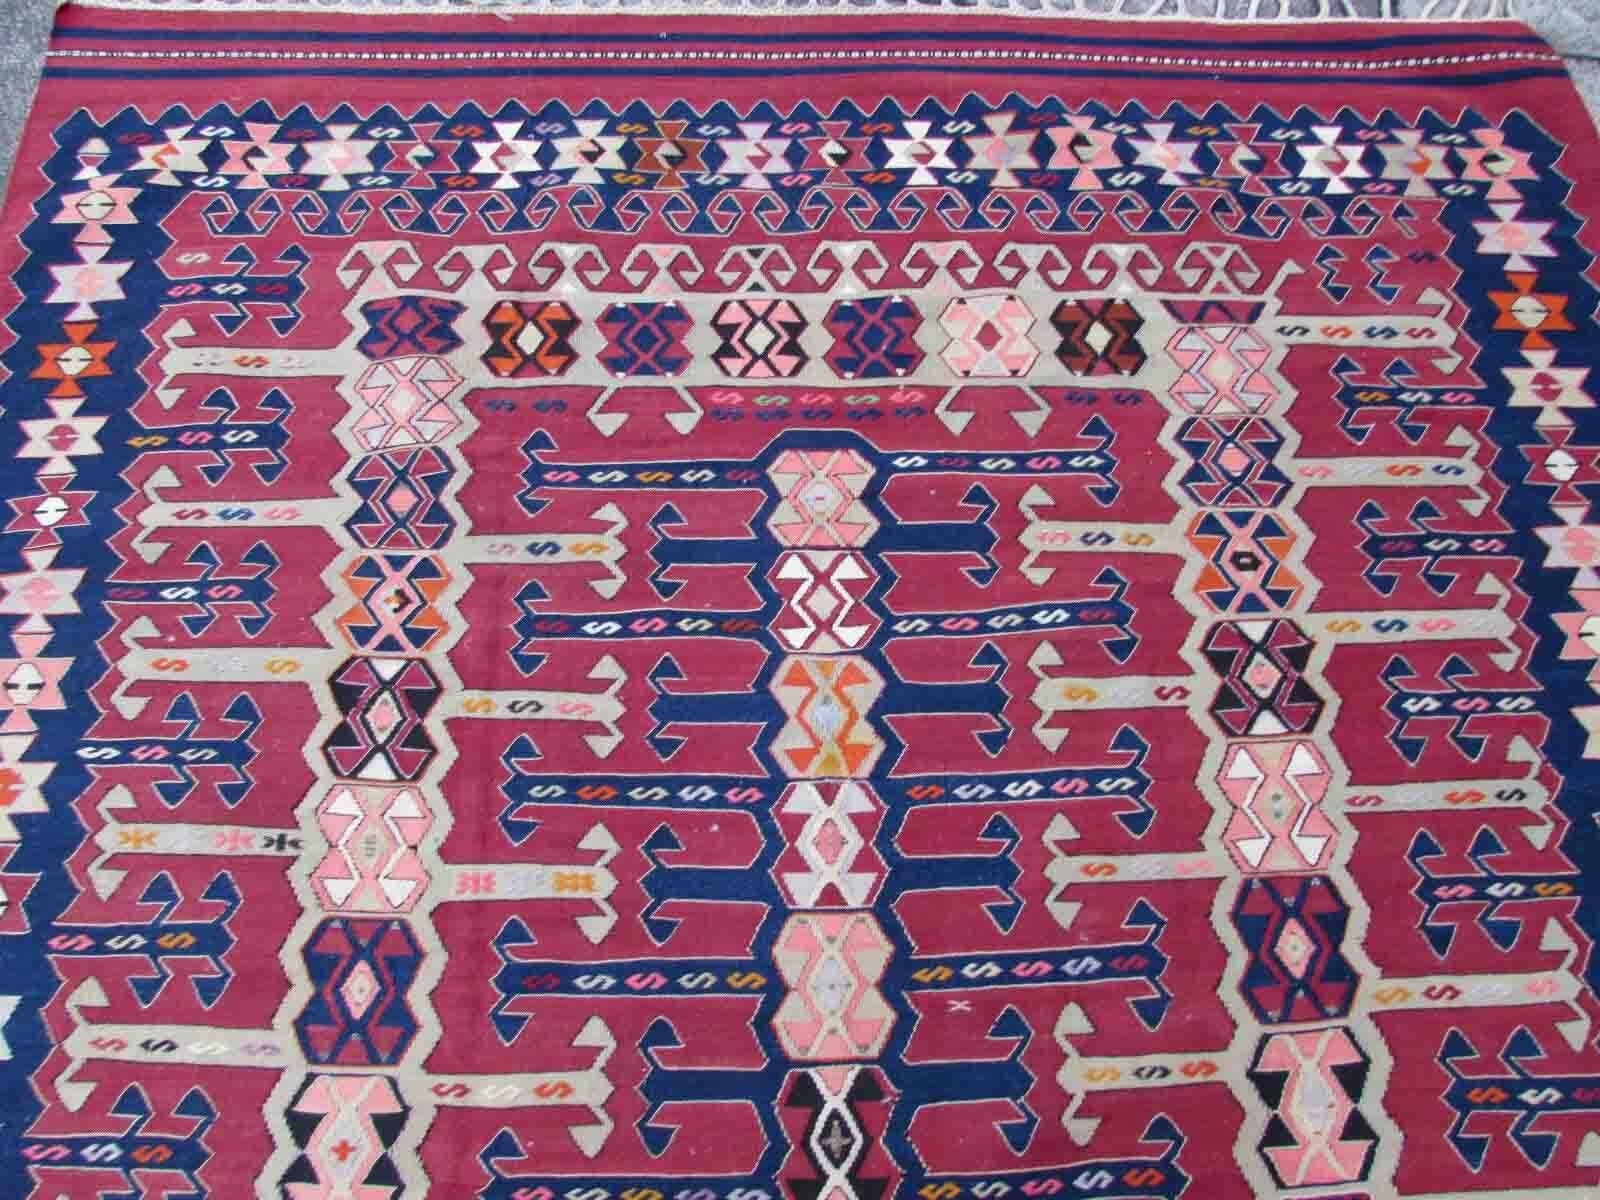 Handmade antique Turkish Anatolian kilim in natural shades and geometric design. The flatweave is from the beginning of 20th century in original good condition.

-condition: original good, 

-circa: 1920s,

-size: 5' x 8.4' (153cm x